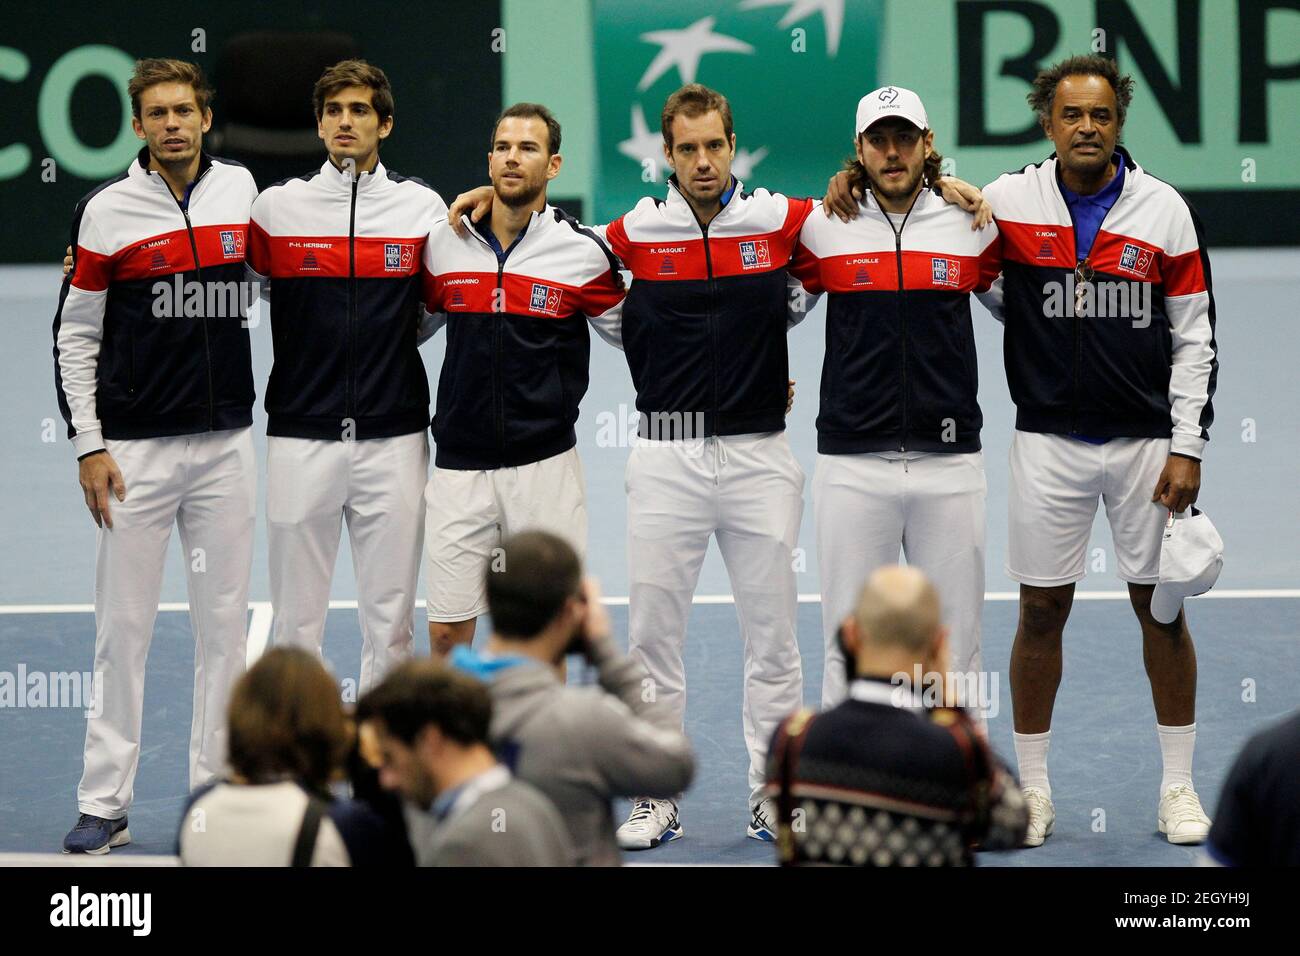 Tennis - Davis Cup - First Round - France vs Netherlands - Halle Olympique,  Albertville, France - February 4, 2018 The France team line up before the  start of play REUTERS/Emmanuel Foudrot Stock Photo - Alamy